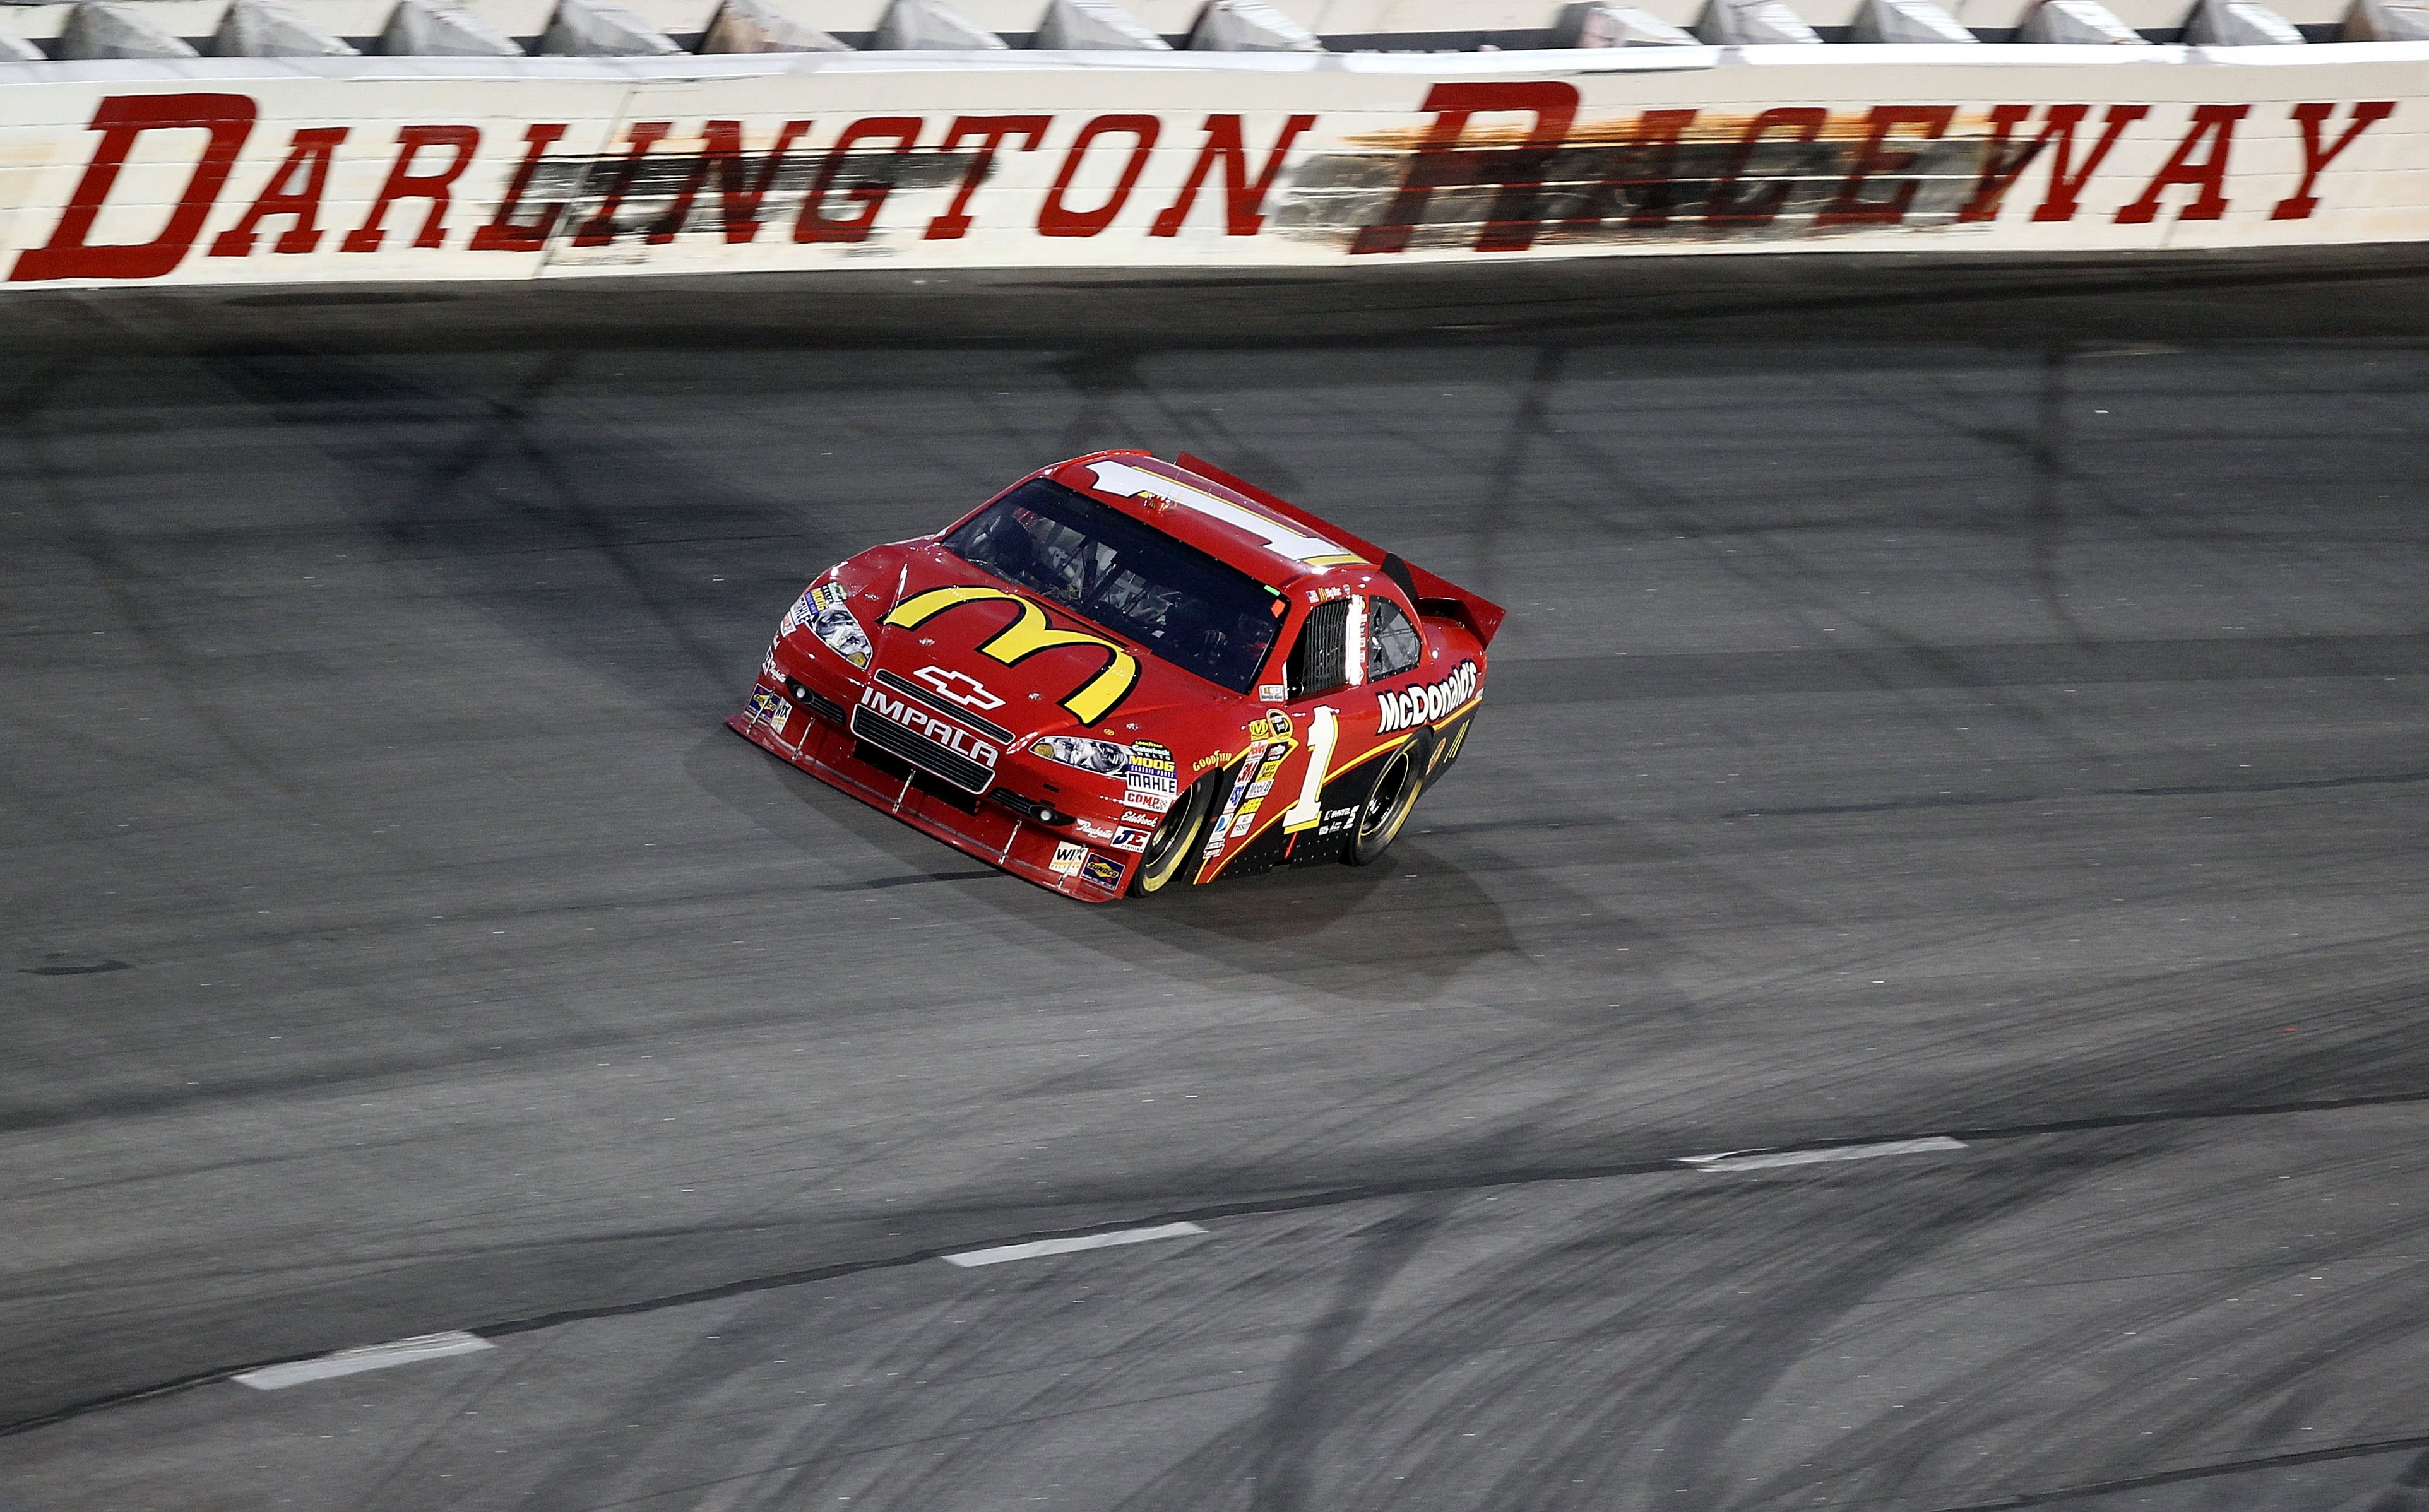 DARLINGTON, SC - MAY 08:  Jamie McMurray, driver of the #1 McDonald's Chevrolet, races during the NASCAR Sprint Cup series SHOWTIME Southern 500 at Darlington Raceway on May 8, 2010 in Darlington, South Carolina.  (Photo by Streeter Lecka/Getty Images)